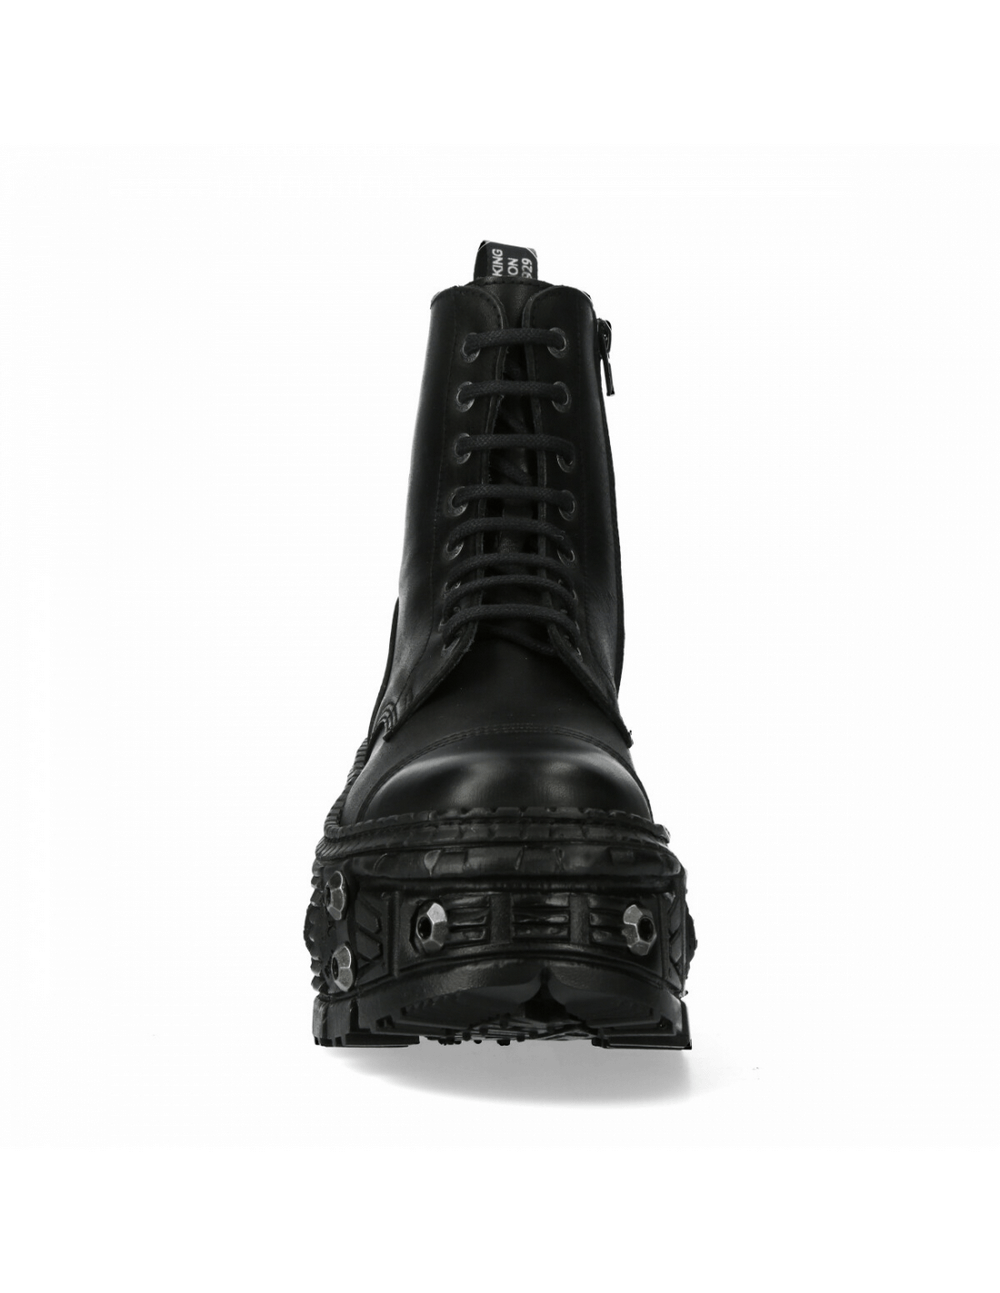 NEW ROCK Black Leather Ankle Platform Boots with Zipper